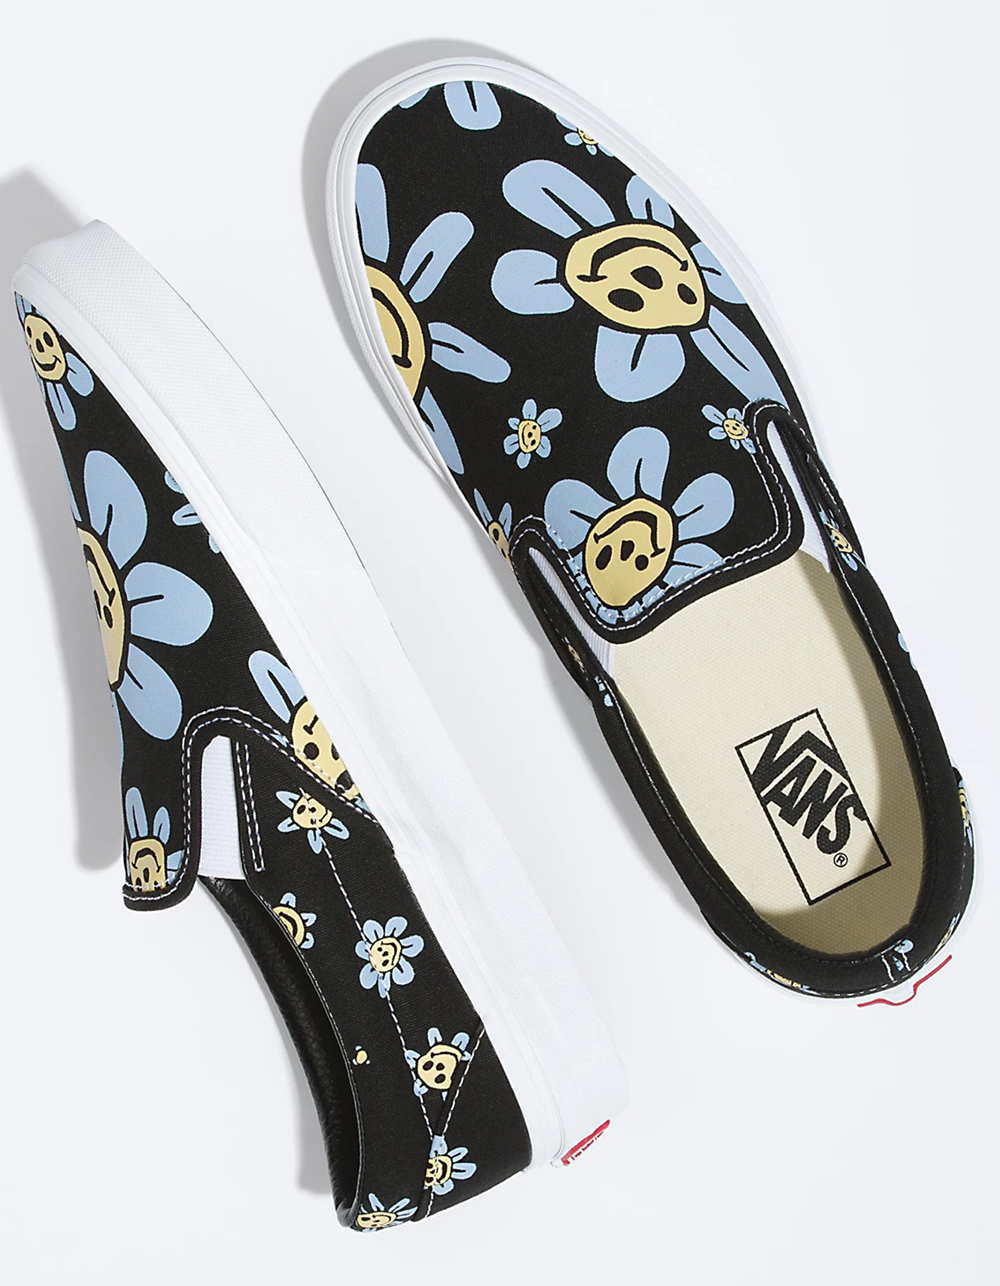 VANS Trippy Grin Classic Slip-On Shoes - BLK/YELLOW | Tillys